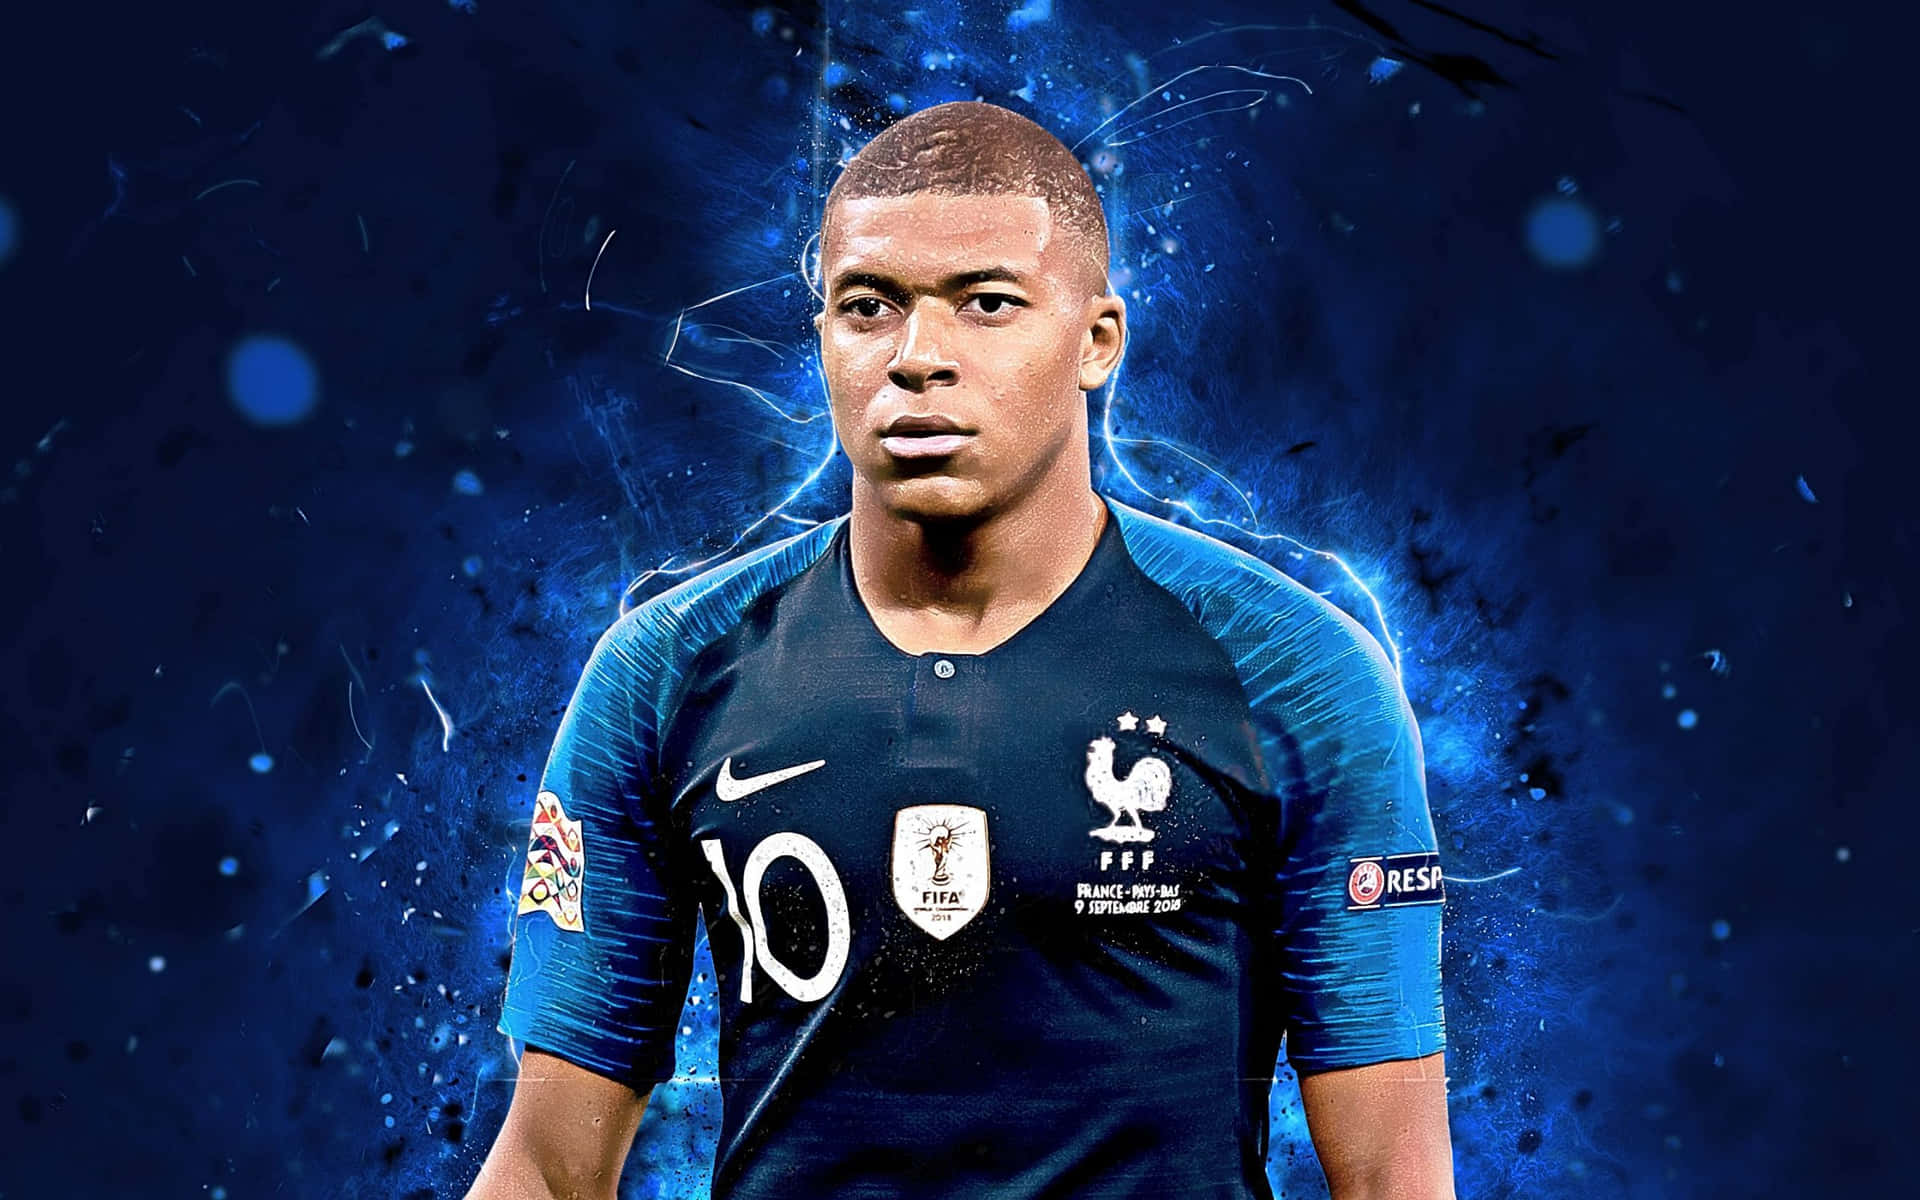 French Professional Footballer Kylian Mbappe Showing Off His Skills